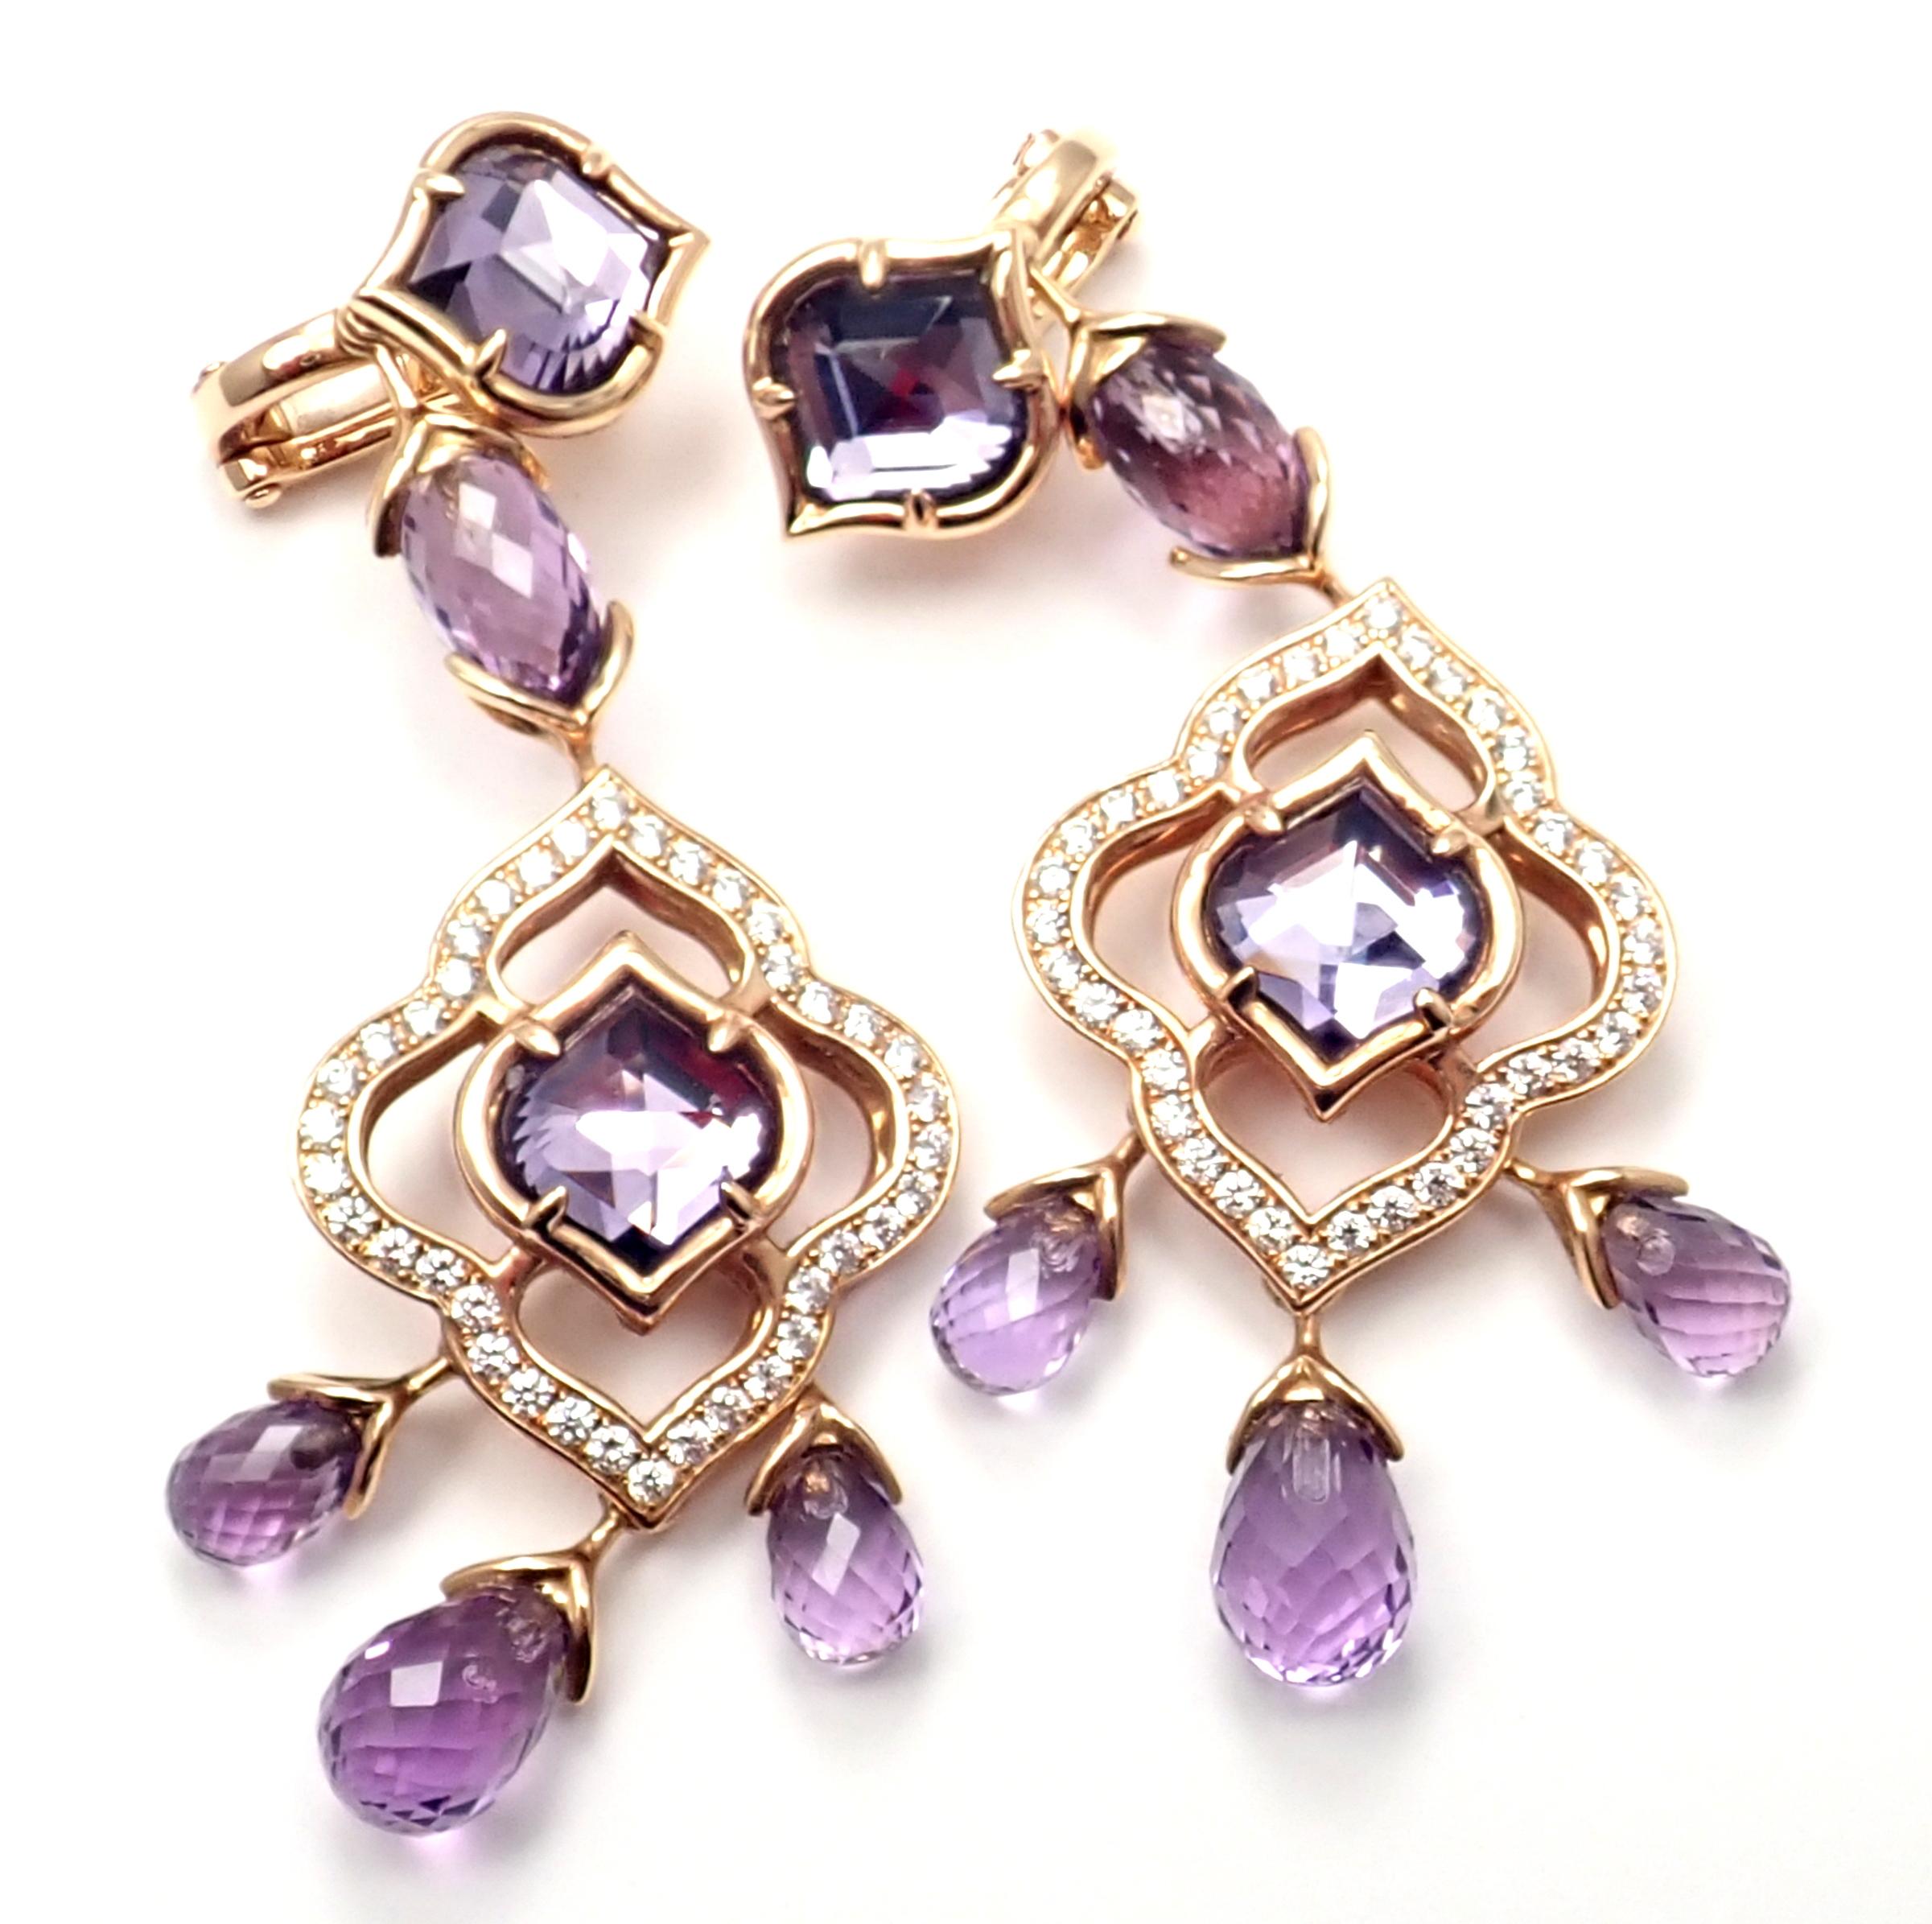 18k Rose Gold Diamond Amethyst Imperiale Drop Earrings from High Jewelry Collection 
by Chopard. 
These earrings come with Chopard certificate and a Chopard box.
These earrings are from High Jewelry collection and they are called Imperiale.
With 72